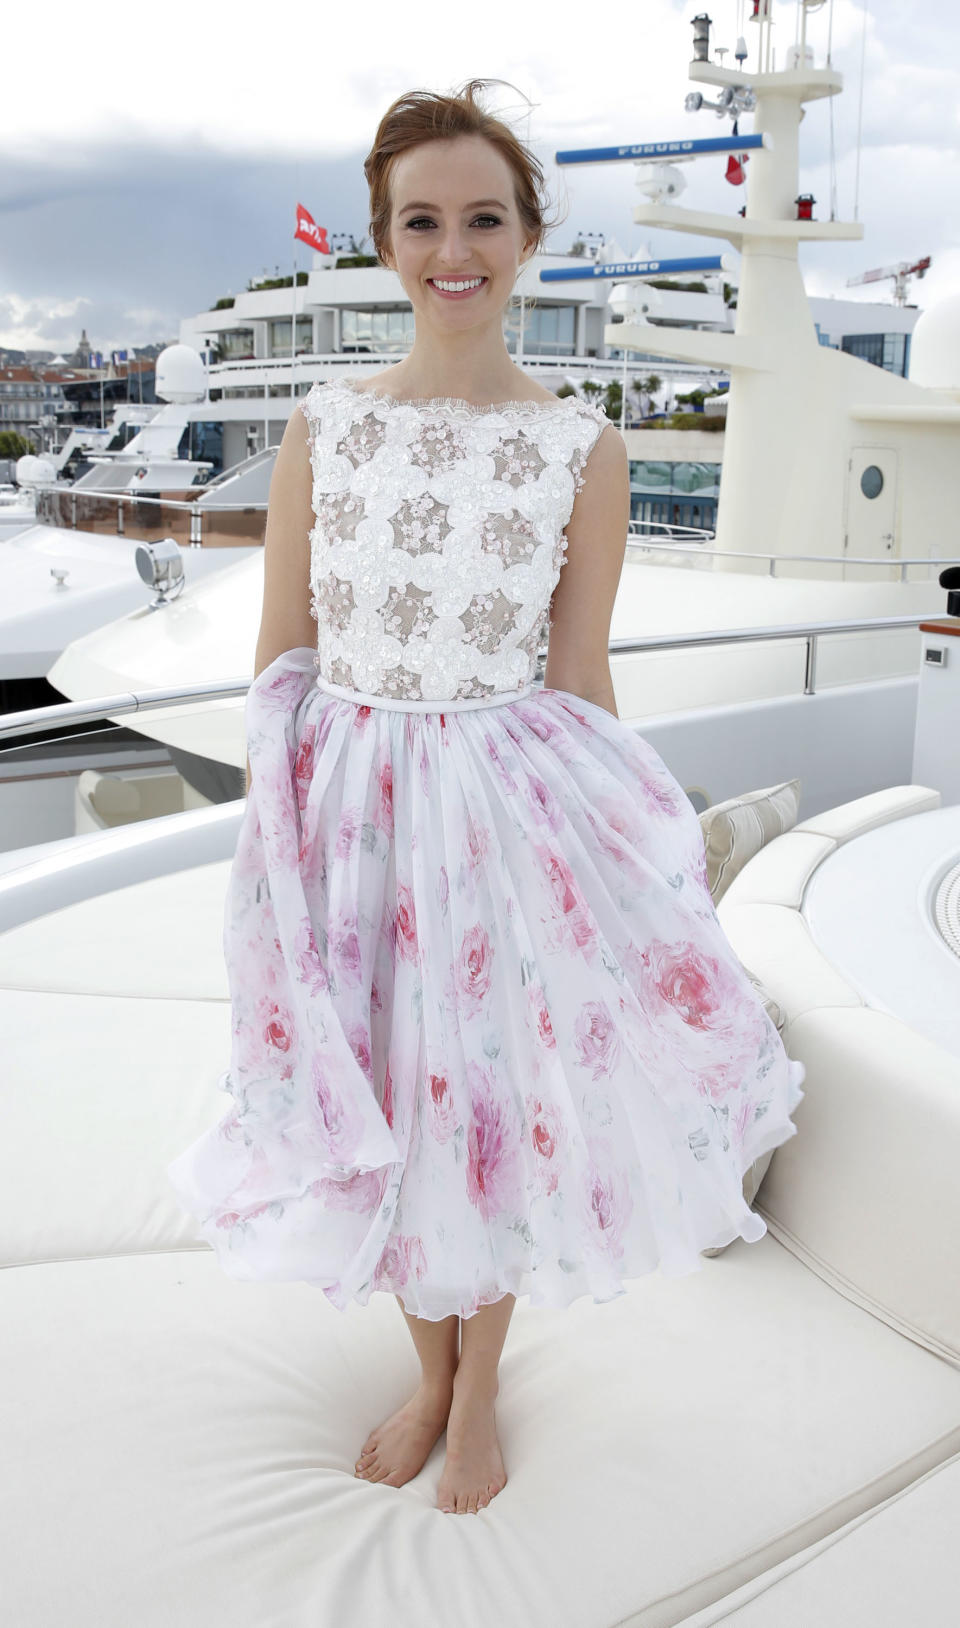 FILE - This May 19, 2013 file photo shows actress Ahna O'Reilly wearing a Georges Hobeika top and floral printed skirt embroidered with Swarovski crystals at the Art of Elysium Party during the 66th international film festival, in Cannes, southern France. (Photo by Todd Williamson/Invision/AP, file)